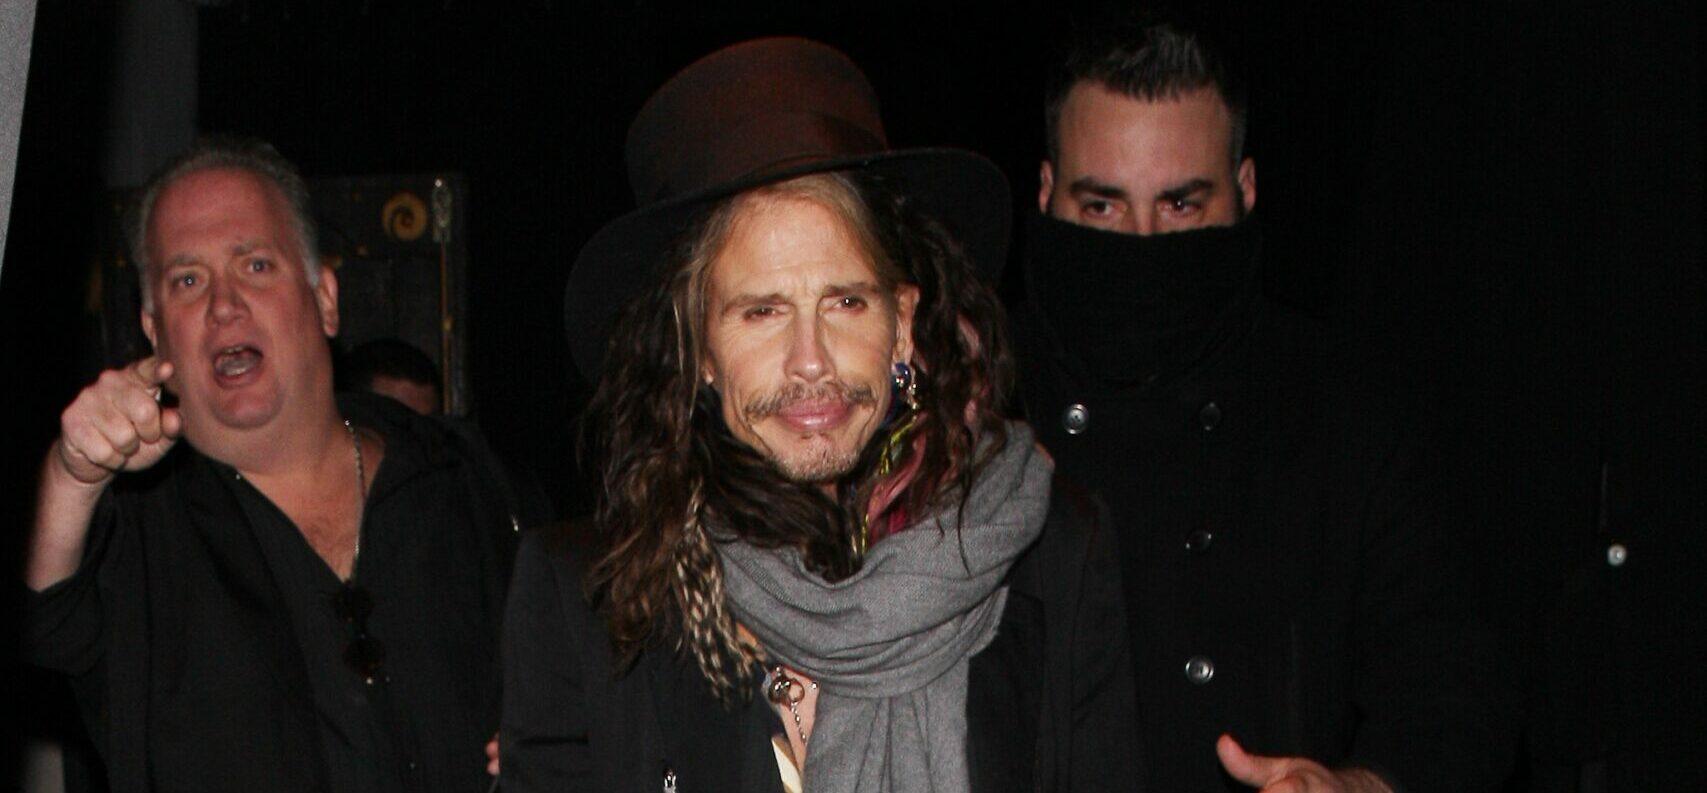 Steven Tyler Accused Of Forcing Abortion After Alleged Assault, New Lawsuit Claims